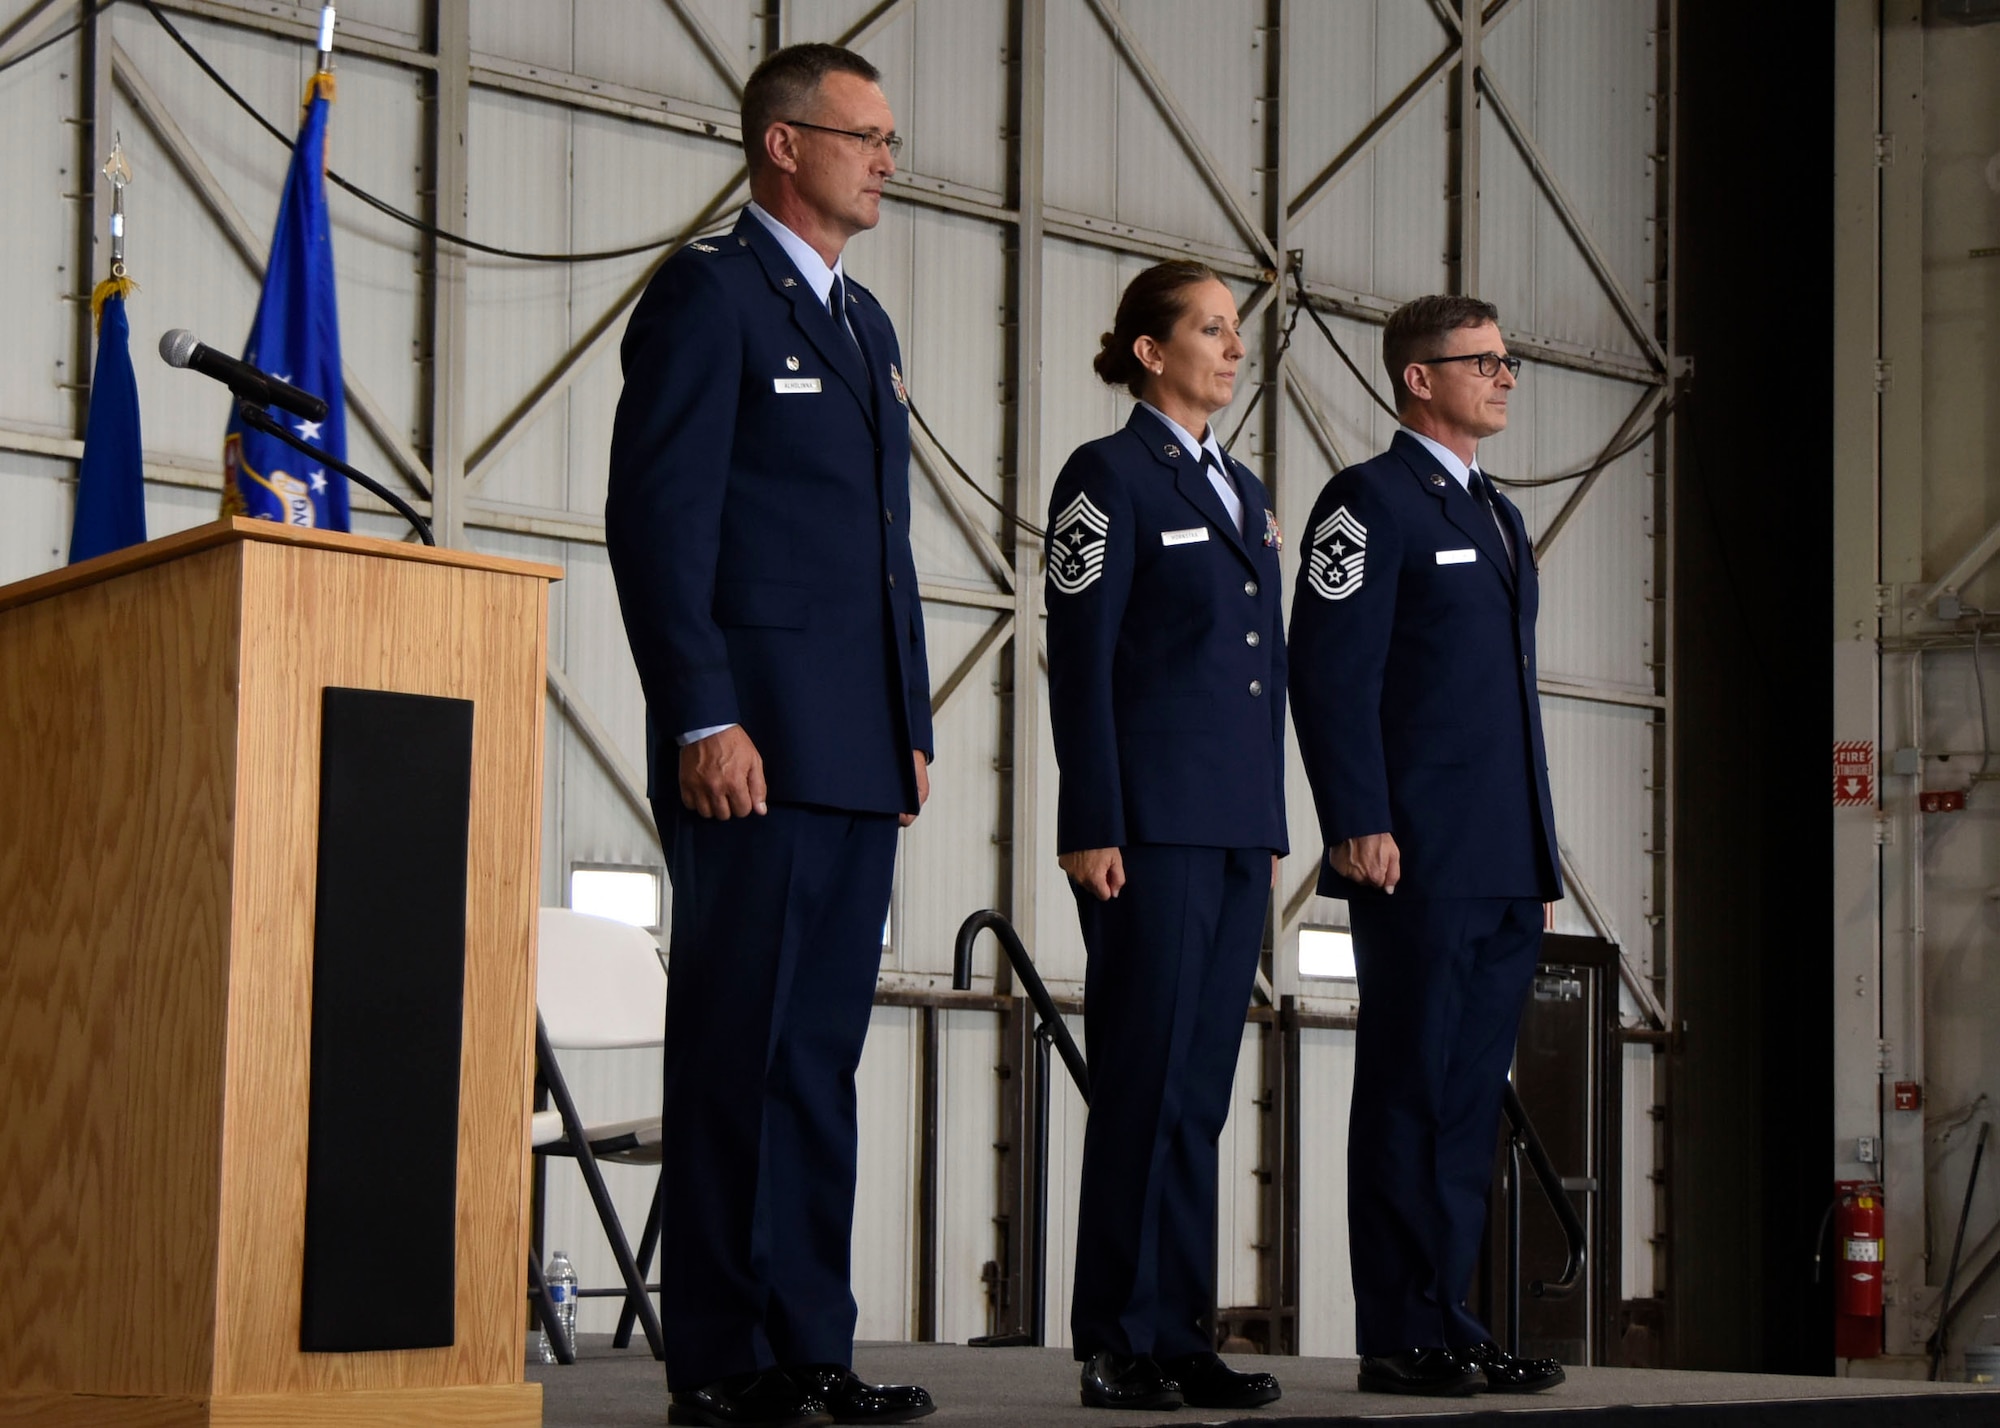 Chief Master Sgt. Zona Hornstra assumed the duties and responsibilities as the Command Chief of the 114th Fighter Wing during a ceremony at Joe Foss Field, Aug. 5, 2017.